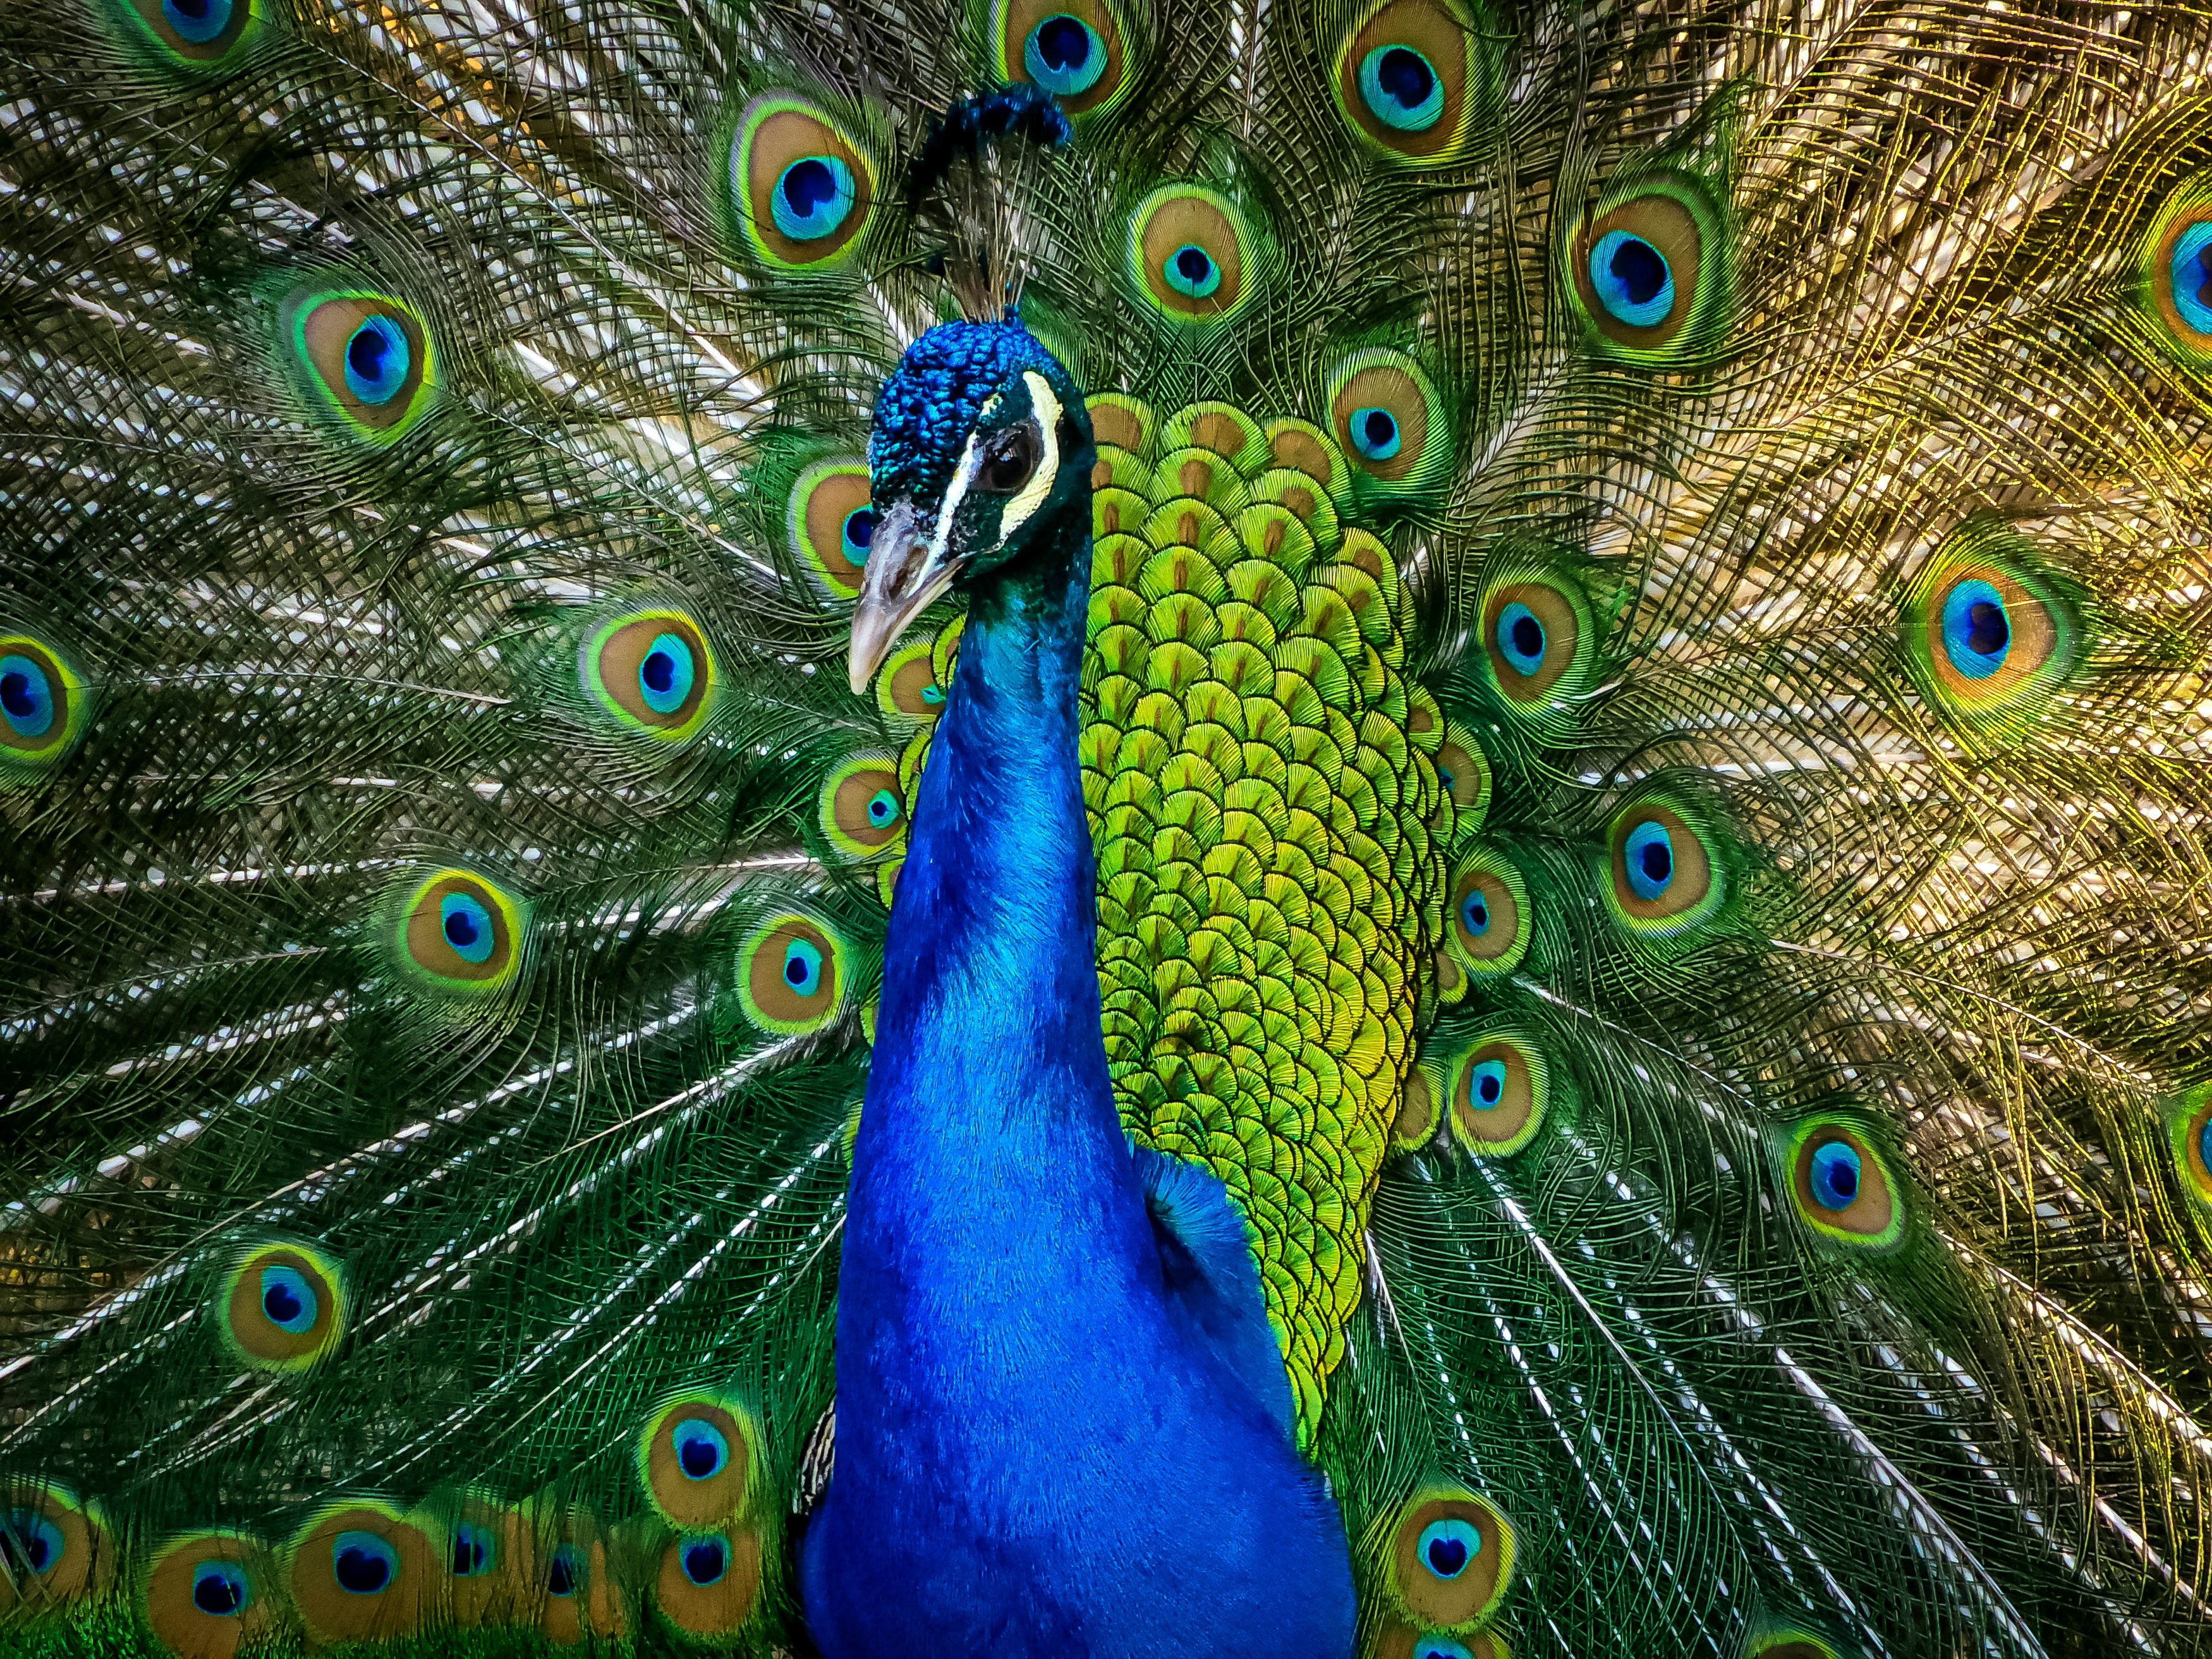 Premium Photo | Peacock on branch wallpaper. colorful flowers 3d mural  background. wall canvas poster art